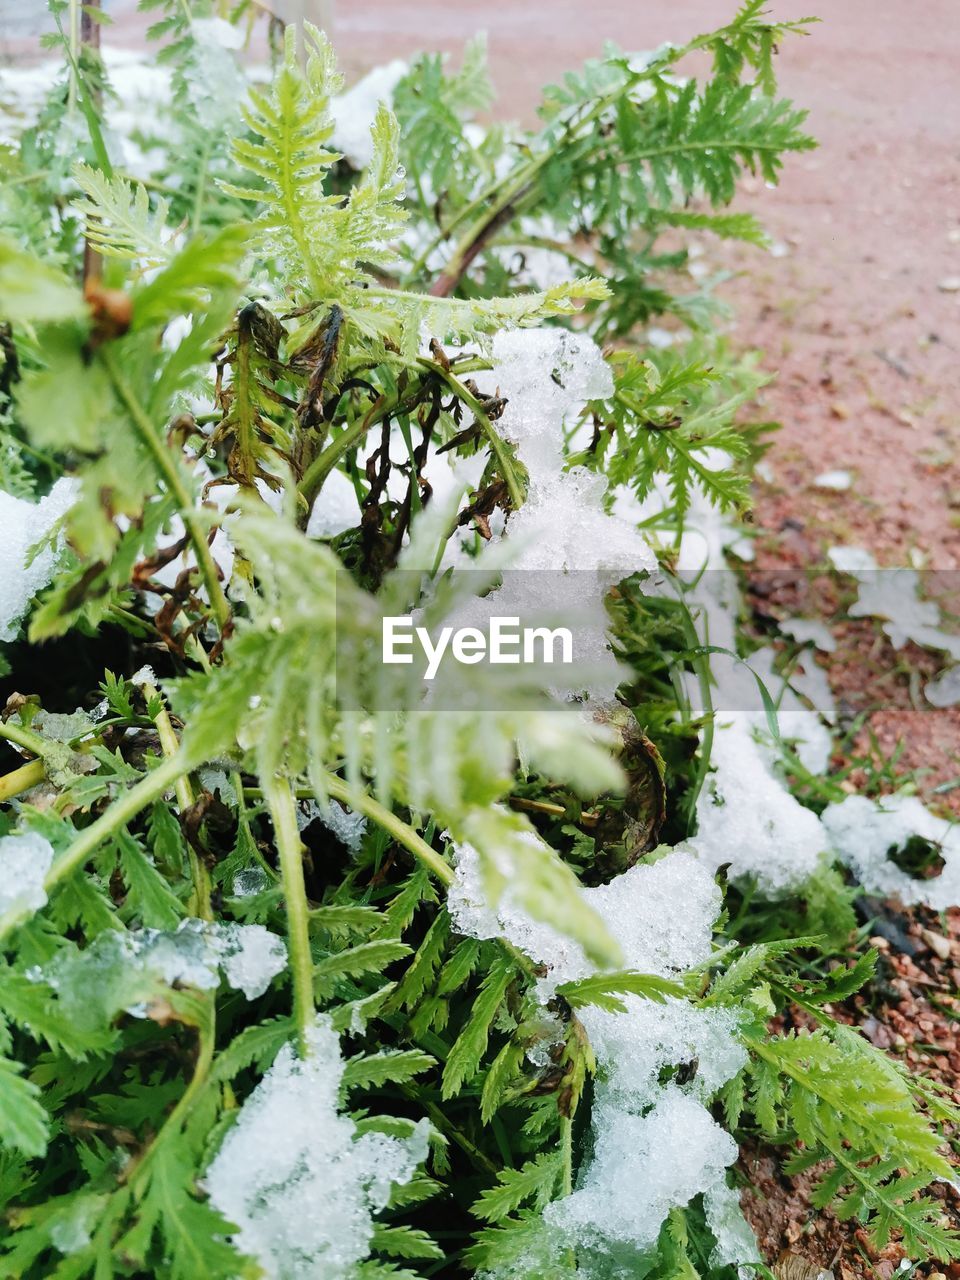 green, plant, nature, growth, leaf, food, plant part, no people, food and drink, flower, garden, produce, day, freshness, vegetable, healthy eating, cold temperature, close-up, high angle view, outdoors, beauty in nature, wellbeing, leaf vegetable, winter, herb